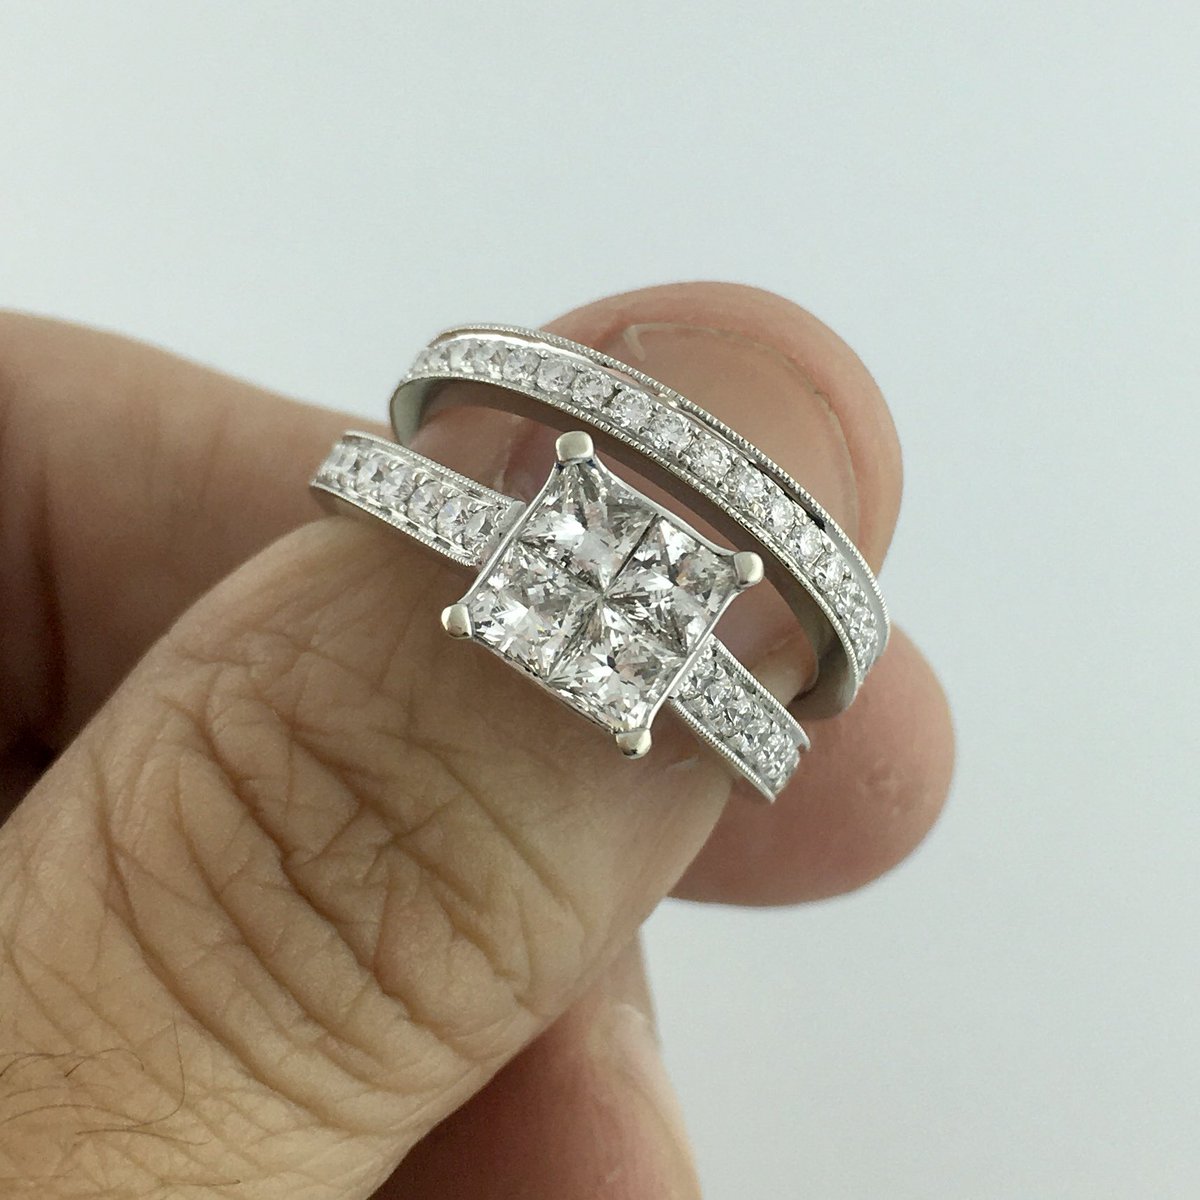 Available now! Diamond wedding set in 14k white gold! Features 42 diamonds for 1.50 ctw! Weighs 7.0 grams in a size 7. Currently 35% off. Take it home for only $1290 out the door! #pawnshop #oakland #bestcollateral #gold #whitegold #diamonds #weddingset #diamondweddingring